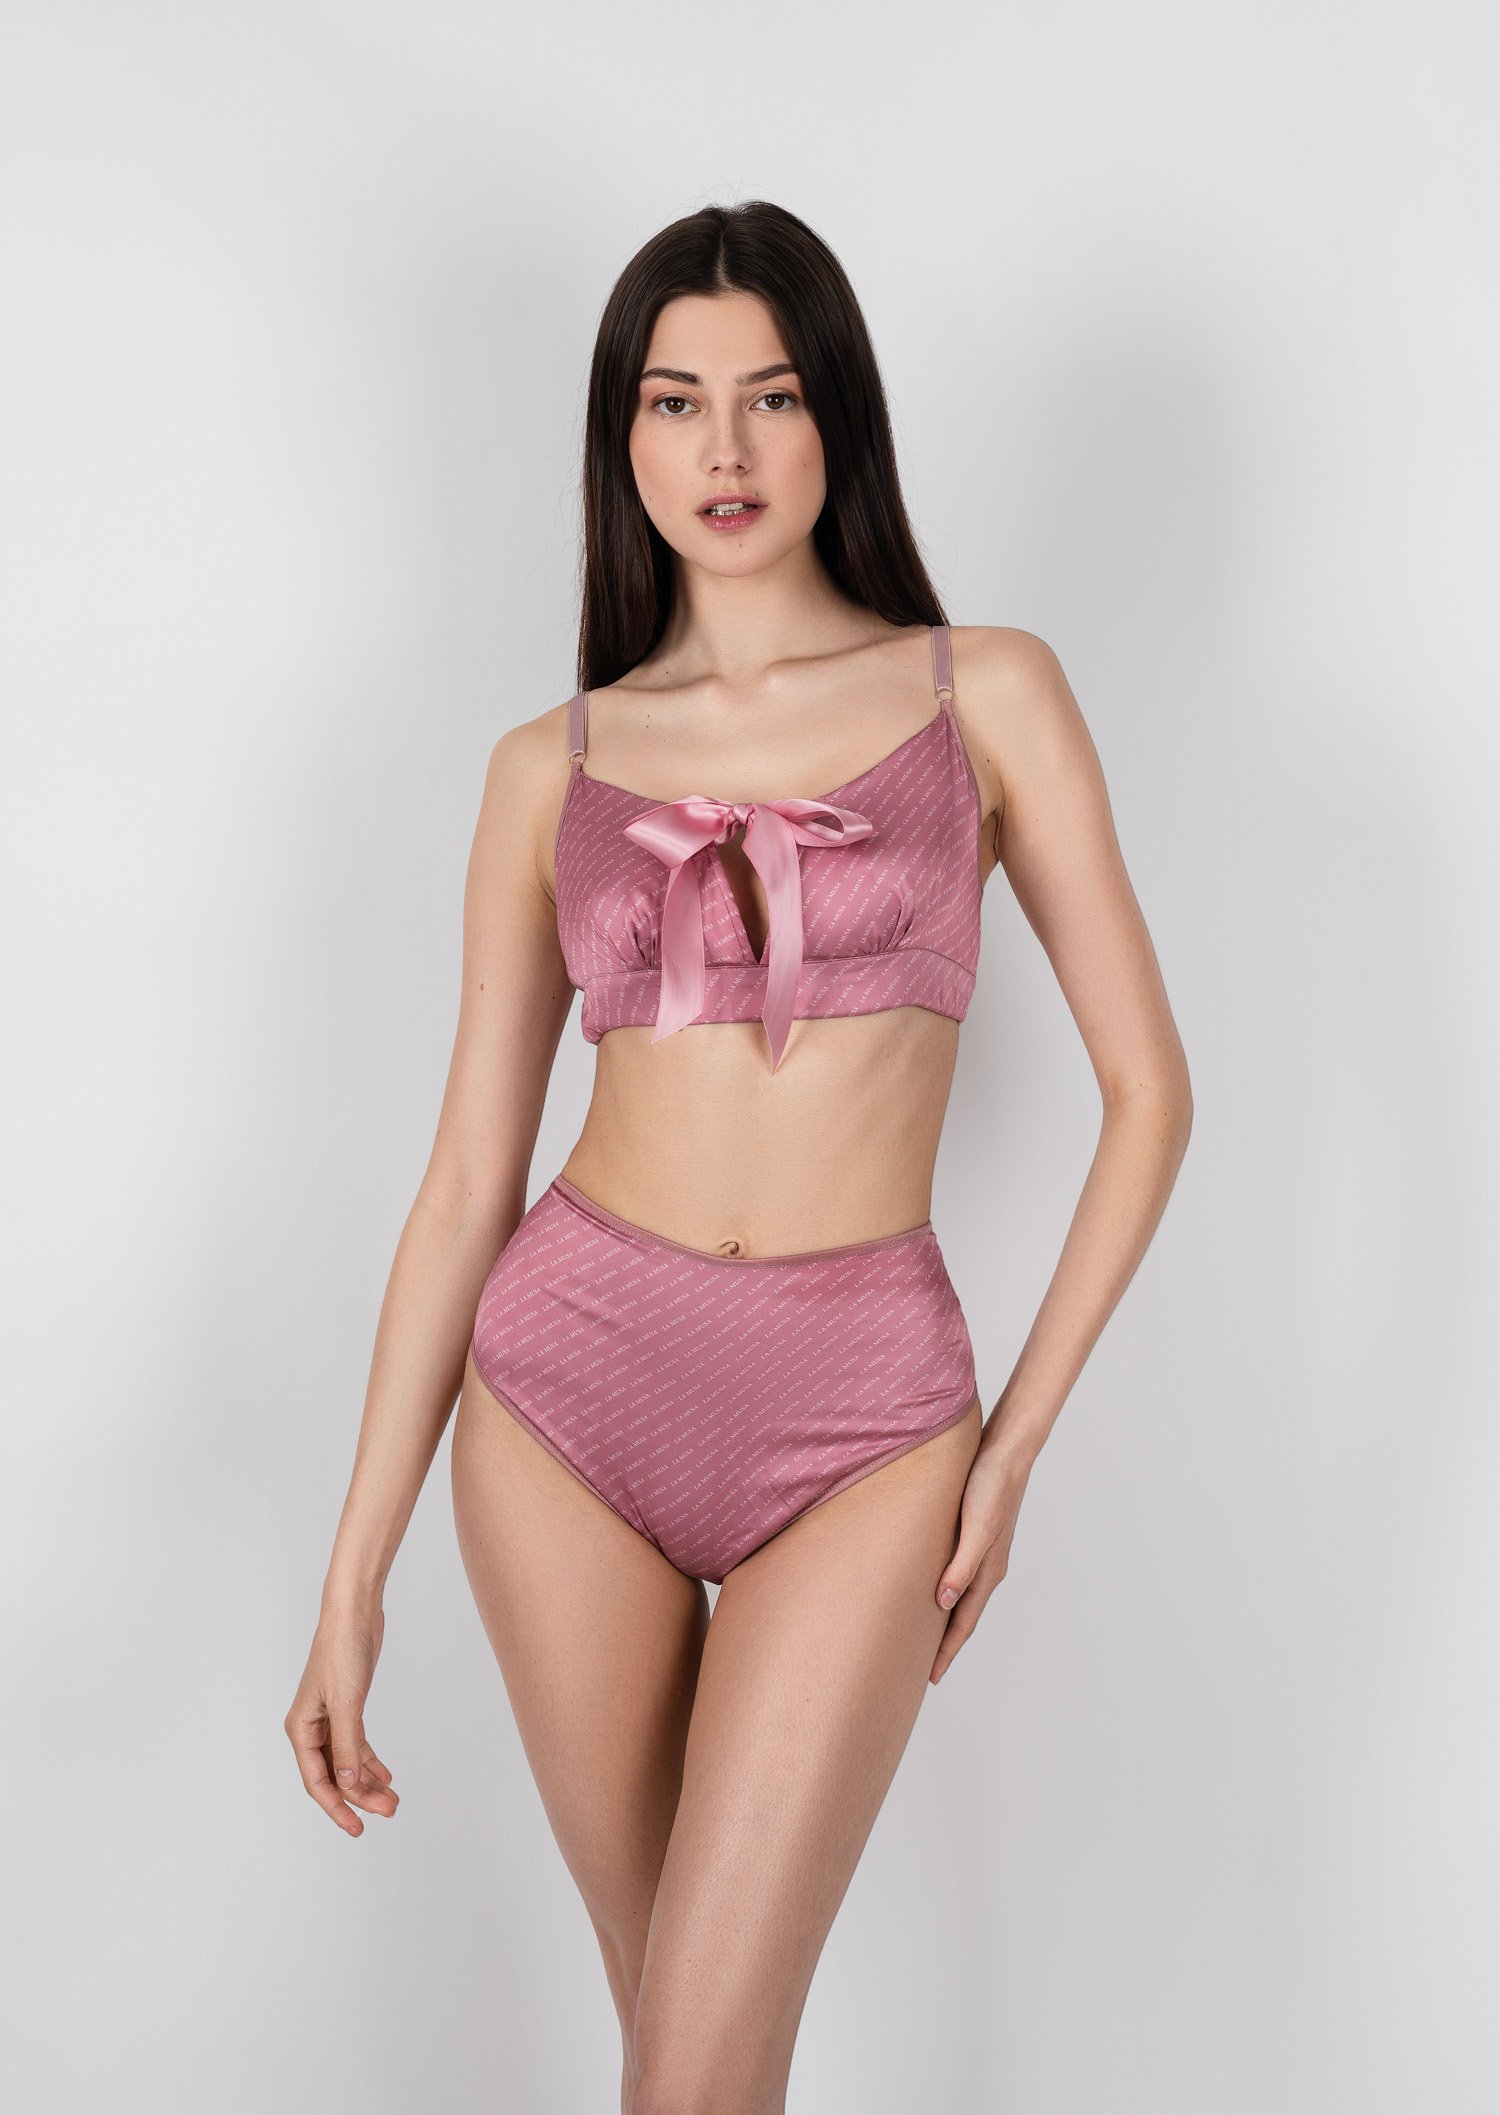 Peonie lingerie set / pink pure non wired bra and high waist panties / transparent erotic lingerie with bow / sexy crotchless underwear